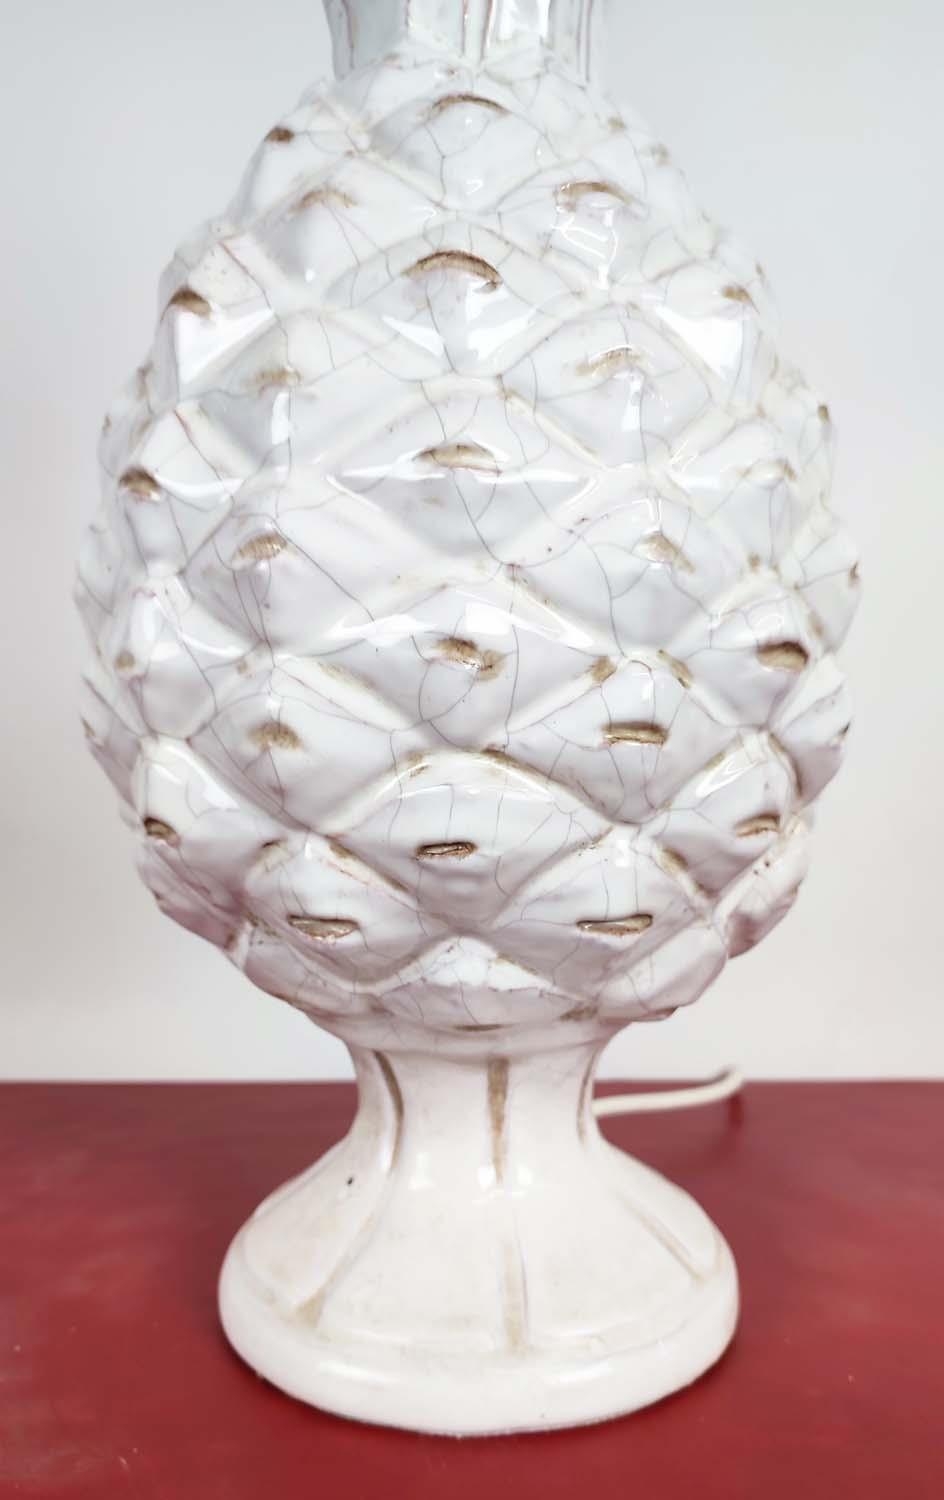 PAOLO MOSCHINO CERAMIC PINEAPPLE TABLE LAMP, 53.5cm H. - Image 3 of 14